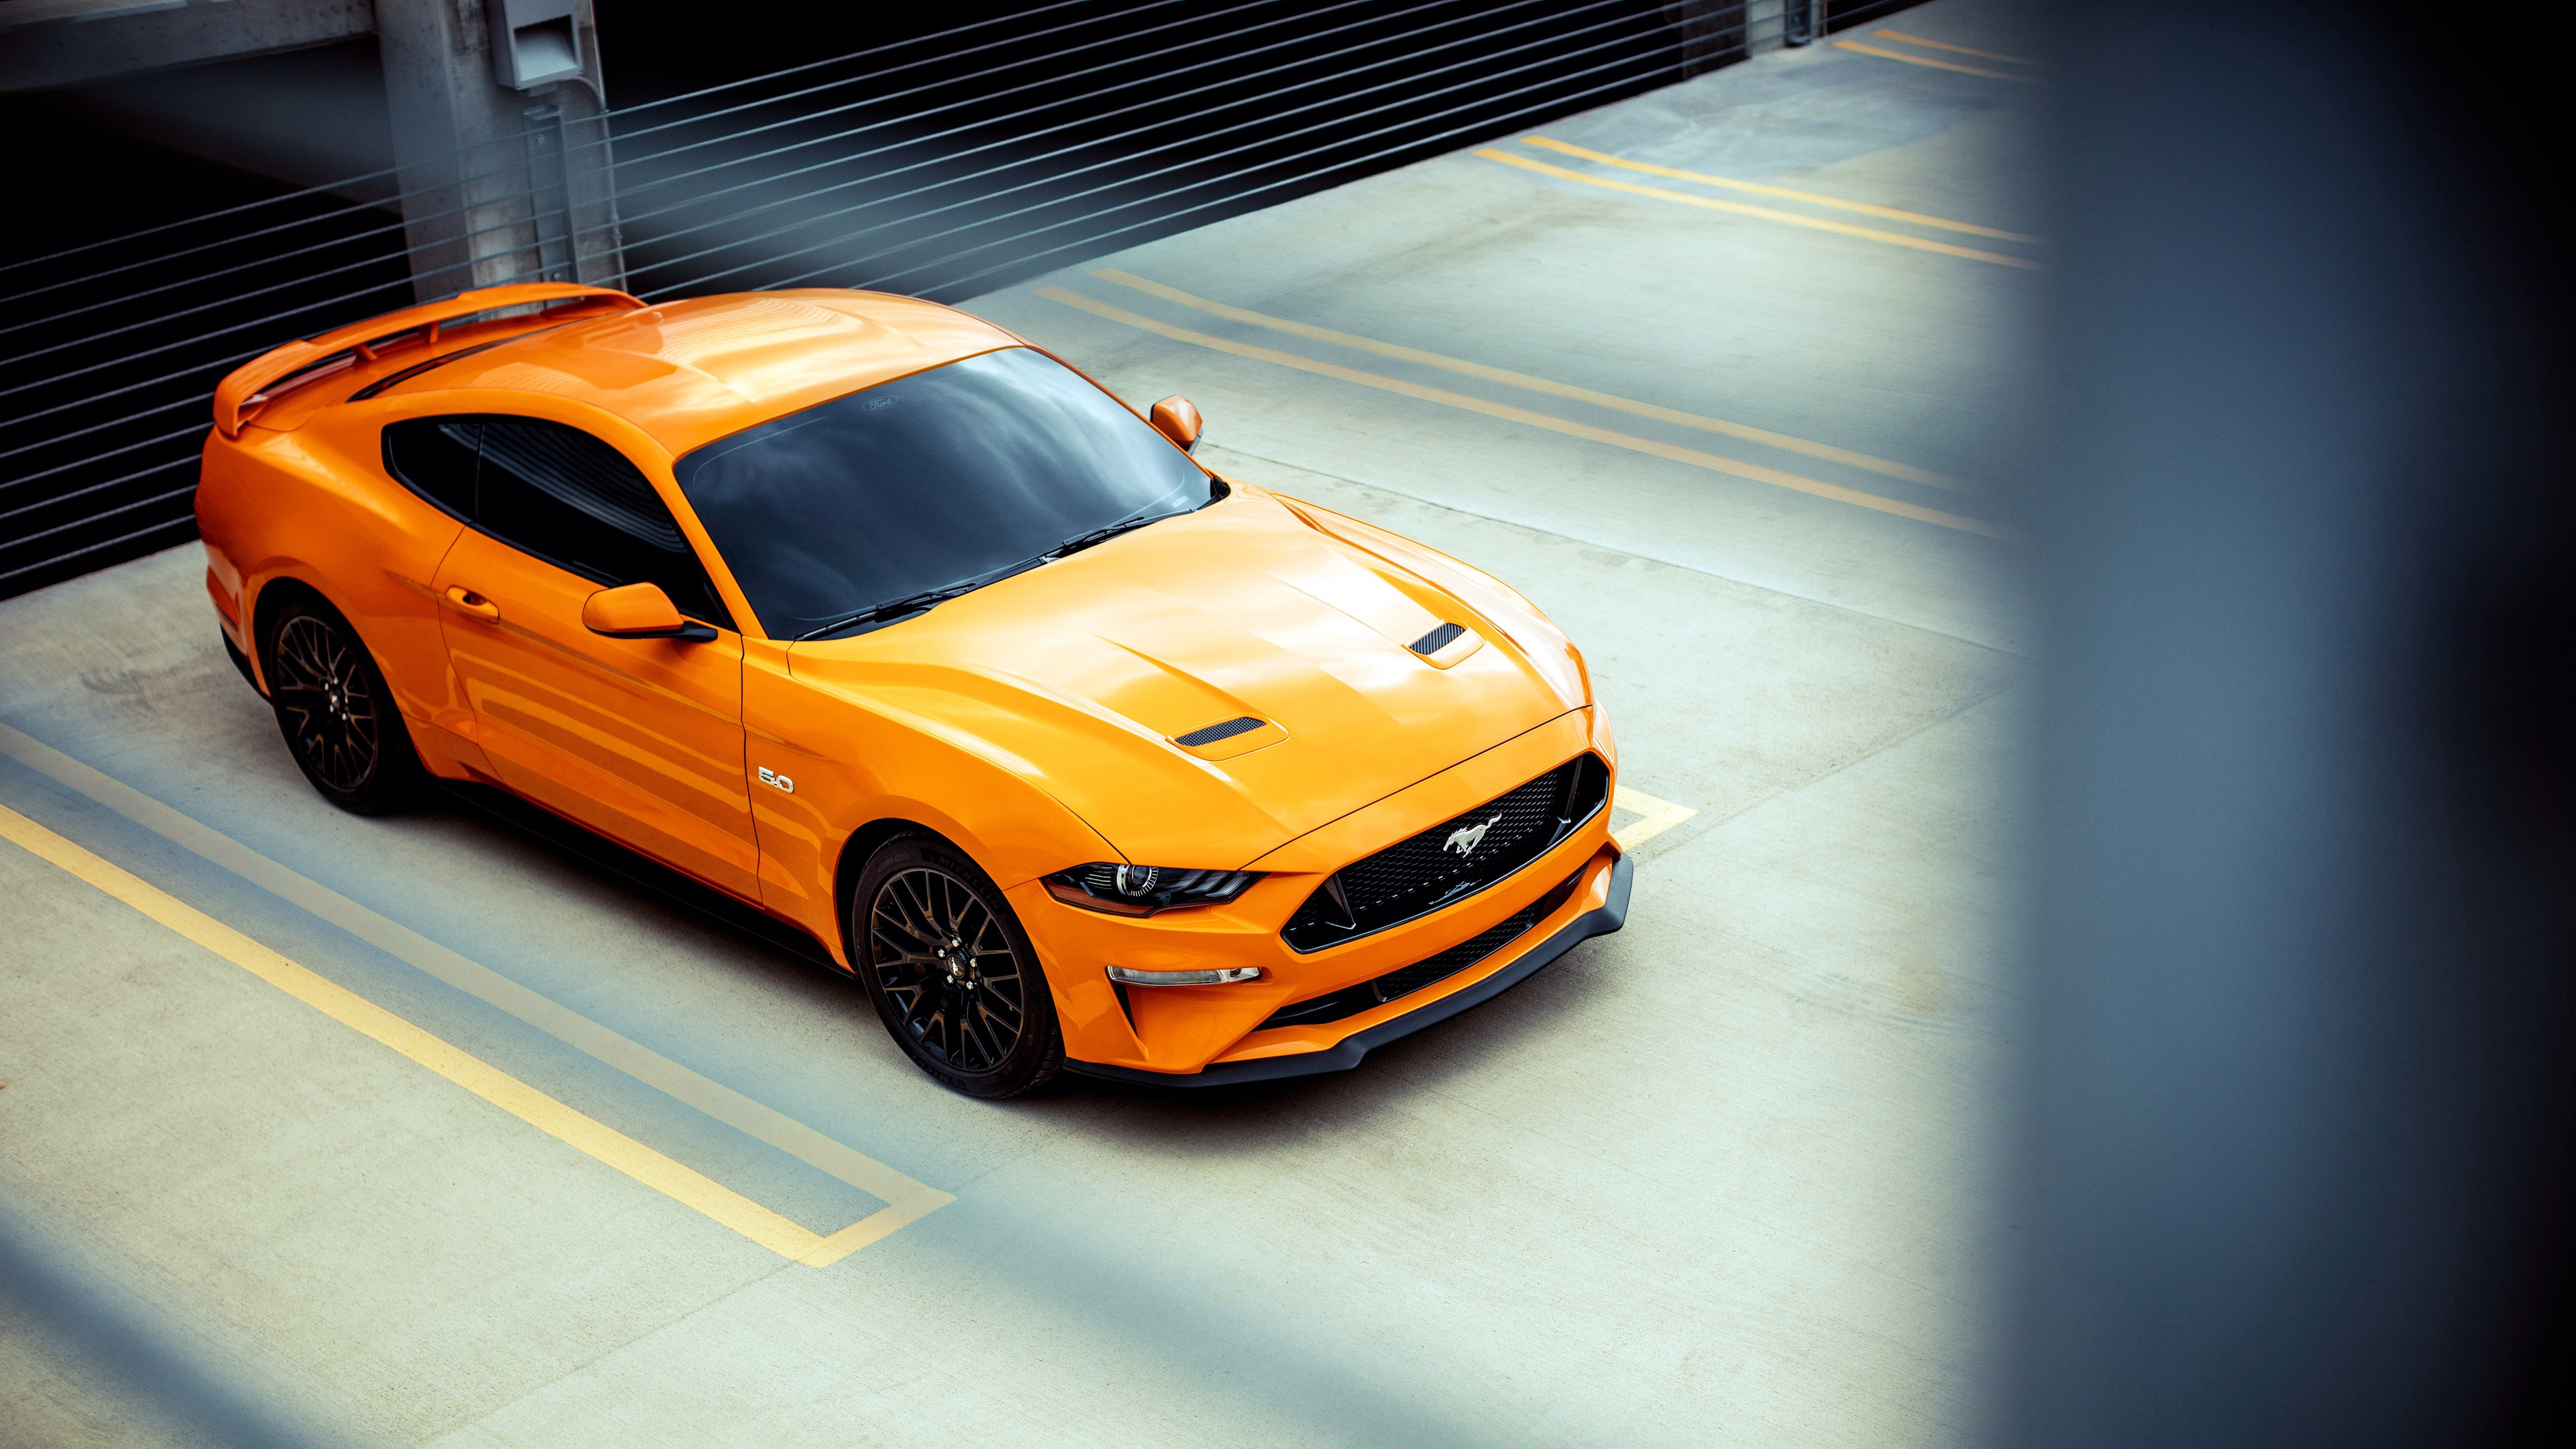 Car Ford Ford Mustang Ford Mustang Gt Muscle Car Orange Car Vehicle 4096x2304